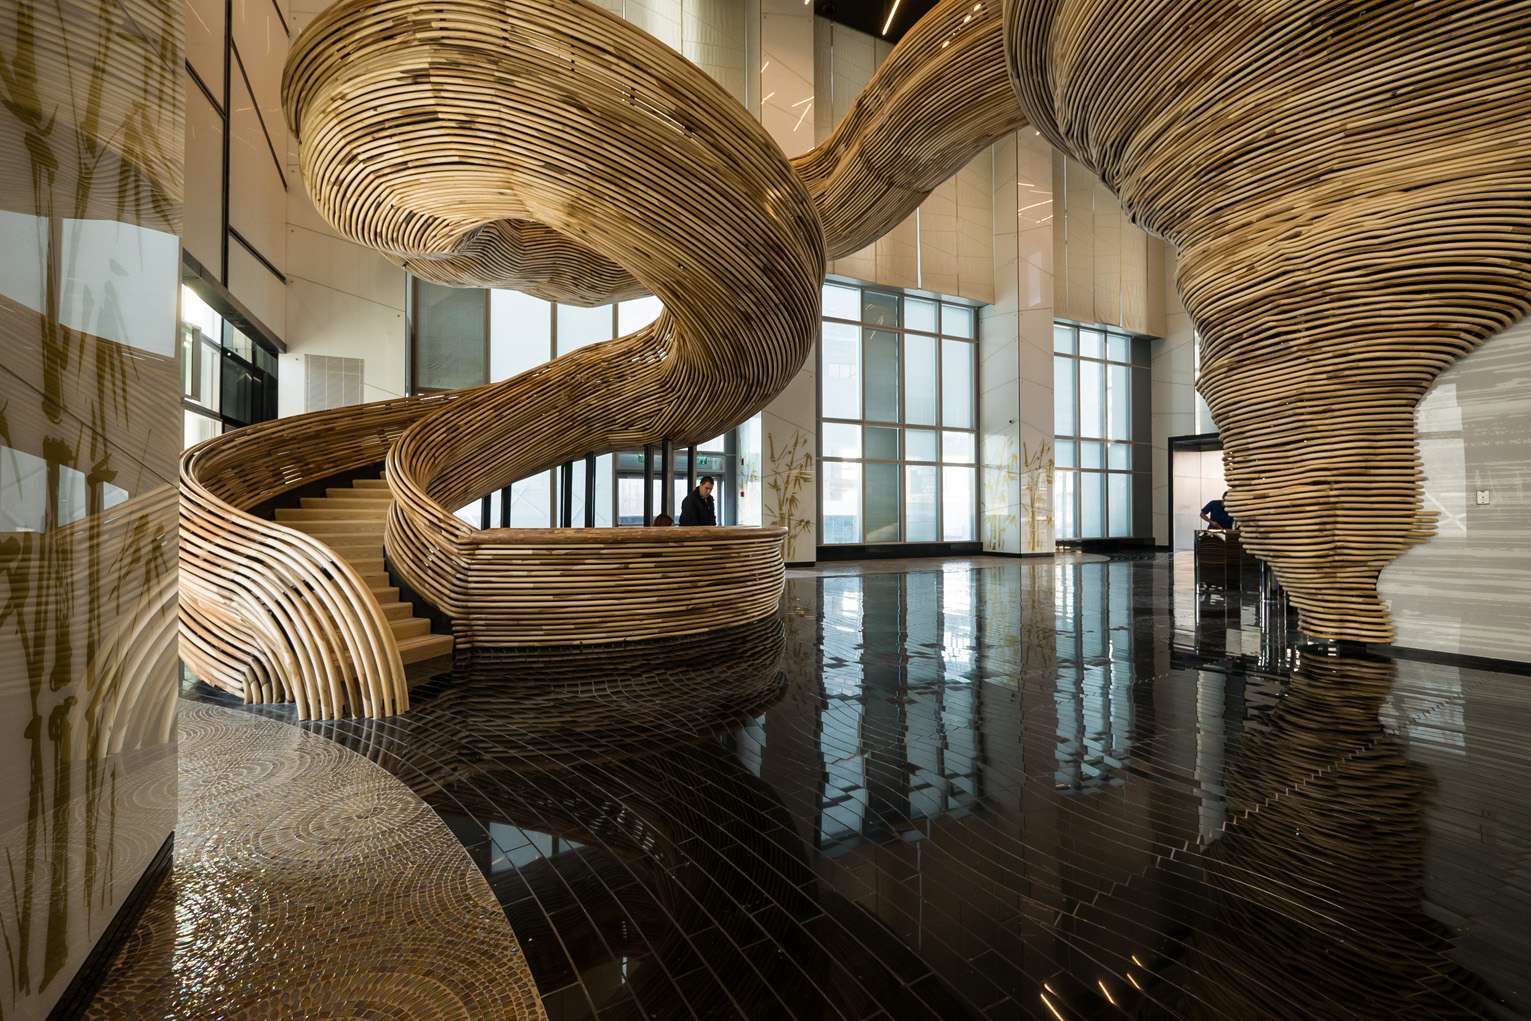 The stair structure comprises two interlocking parts: a skeletal metal staircase and a sculptural wooden envelope.